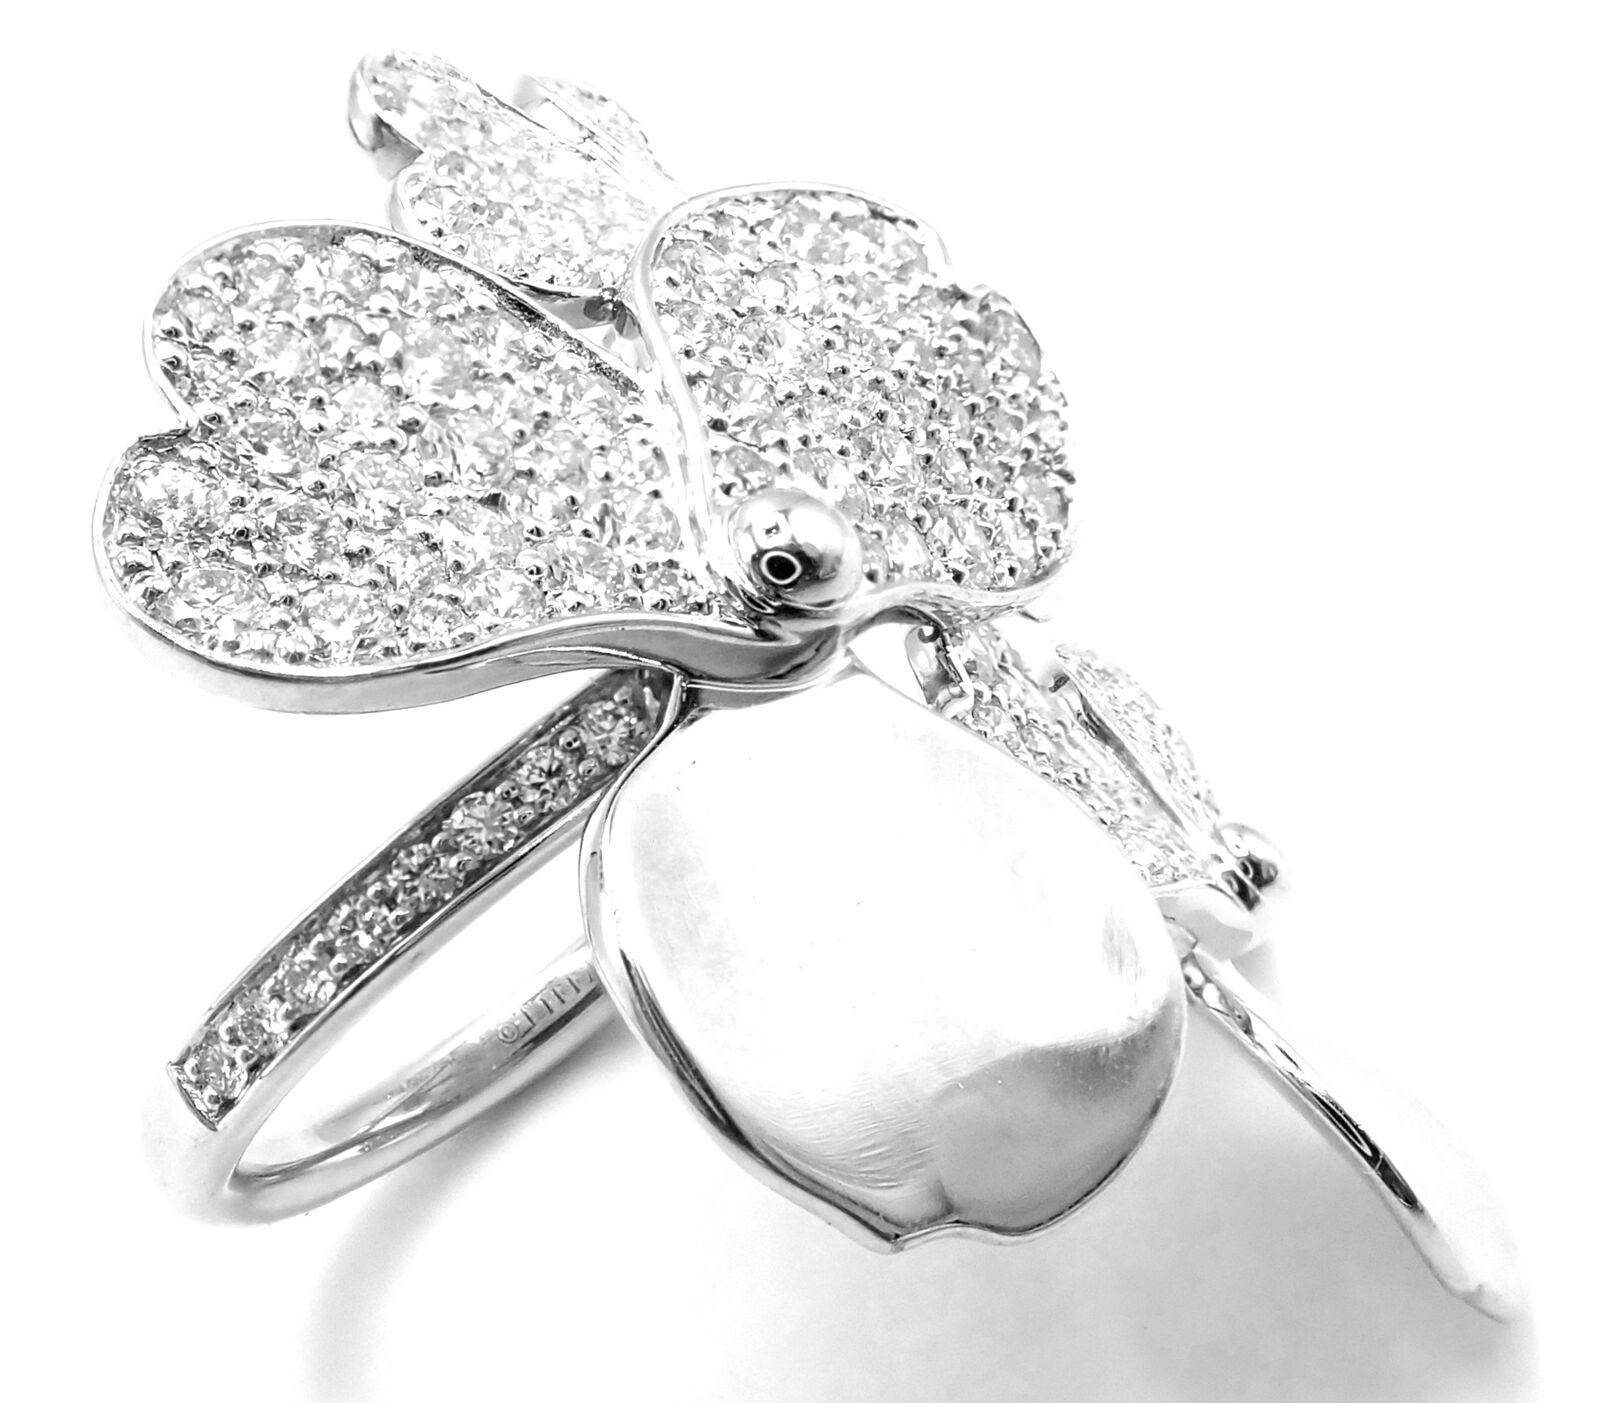 Platinum Diamond Paper Flowers Large Ring by Tiffany & Co.
With Round brilliant cut diamonds VS1 clarity, E color total weight approximately 1.51ct
Measurements:
Ring Size: 5.25
Weight: 12.1 grams
Width: 34mm
Stamped Hallmarks: Tiffany&Co